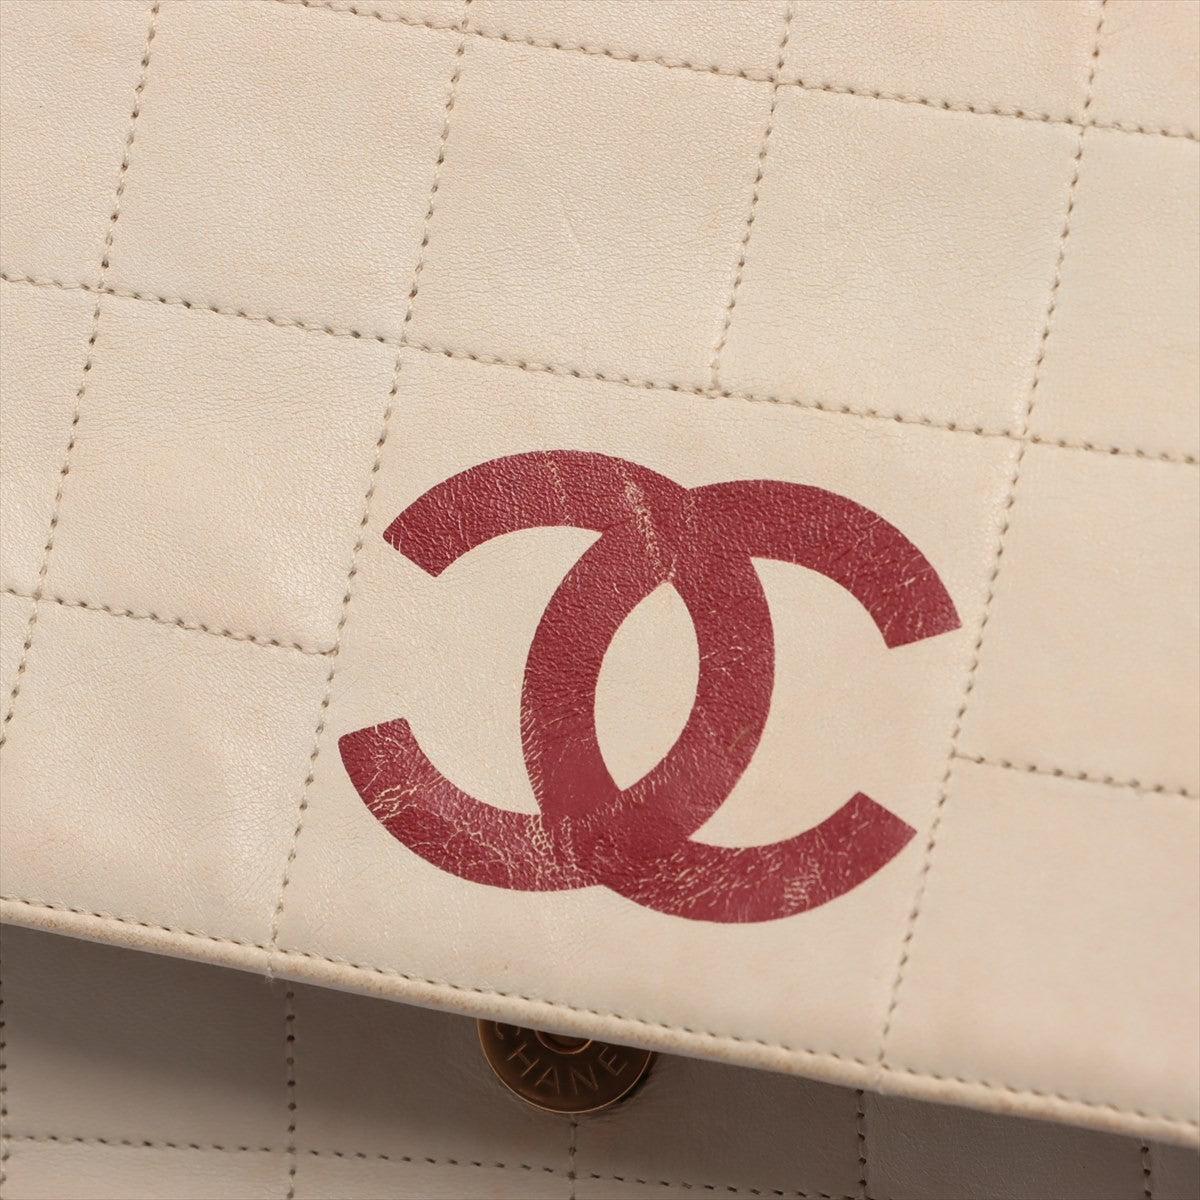 This Chanel shoulder bag is crafted in white lambskin leather with stylistic 6